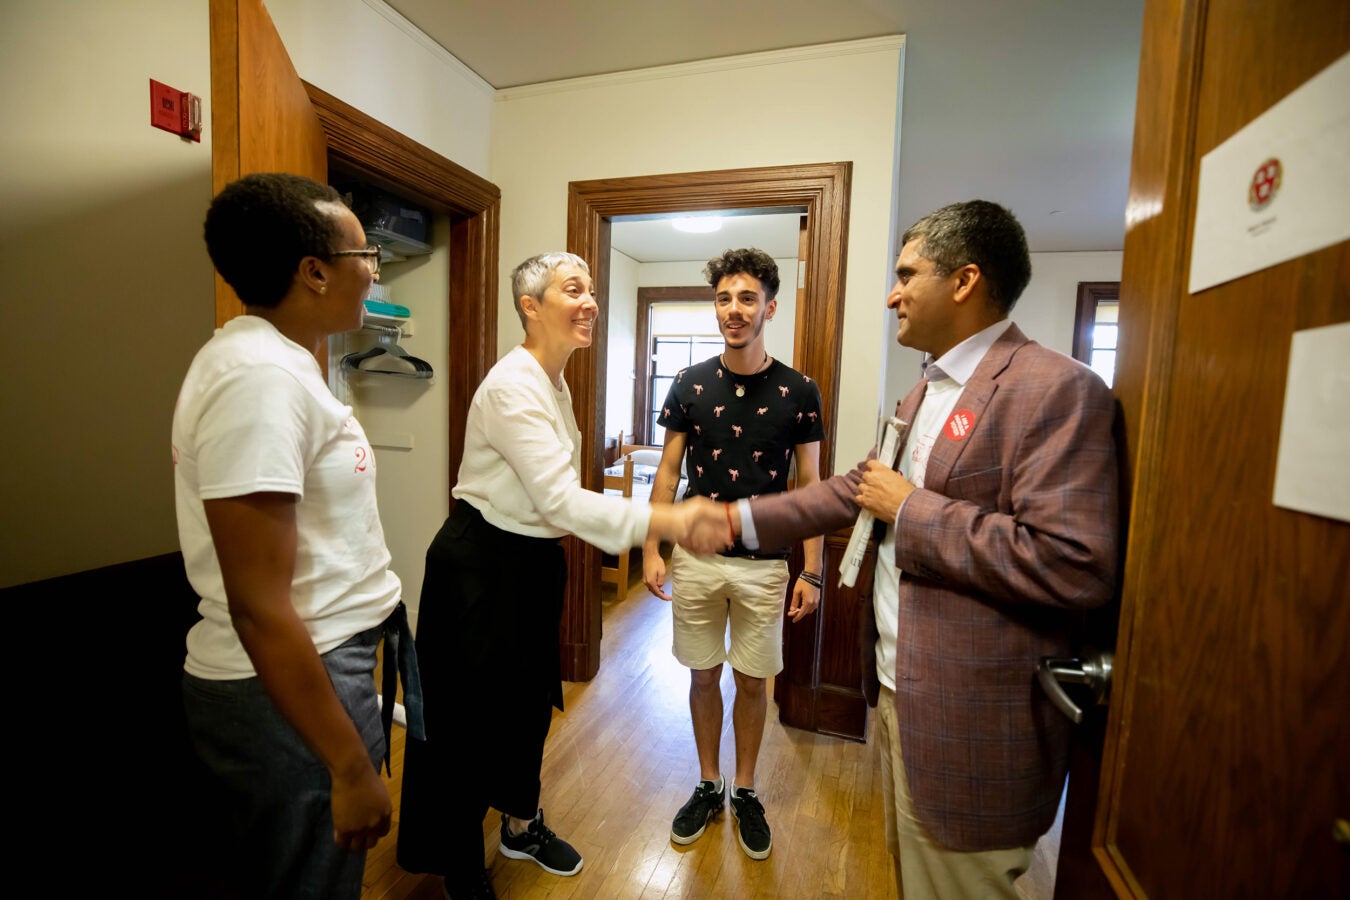 Deans greet a parent and student